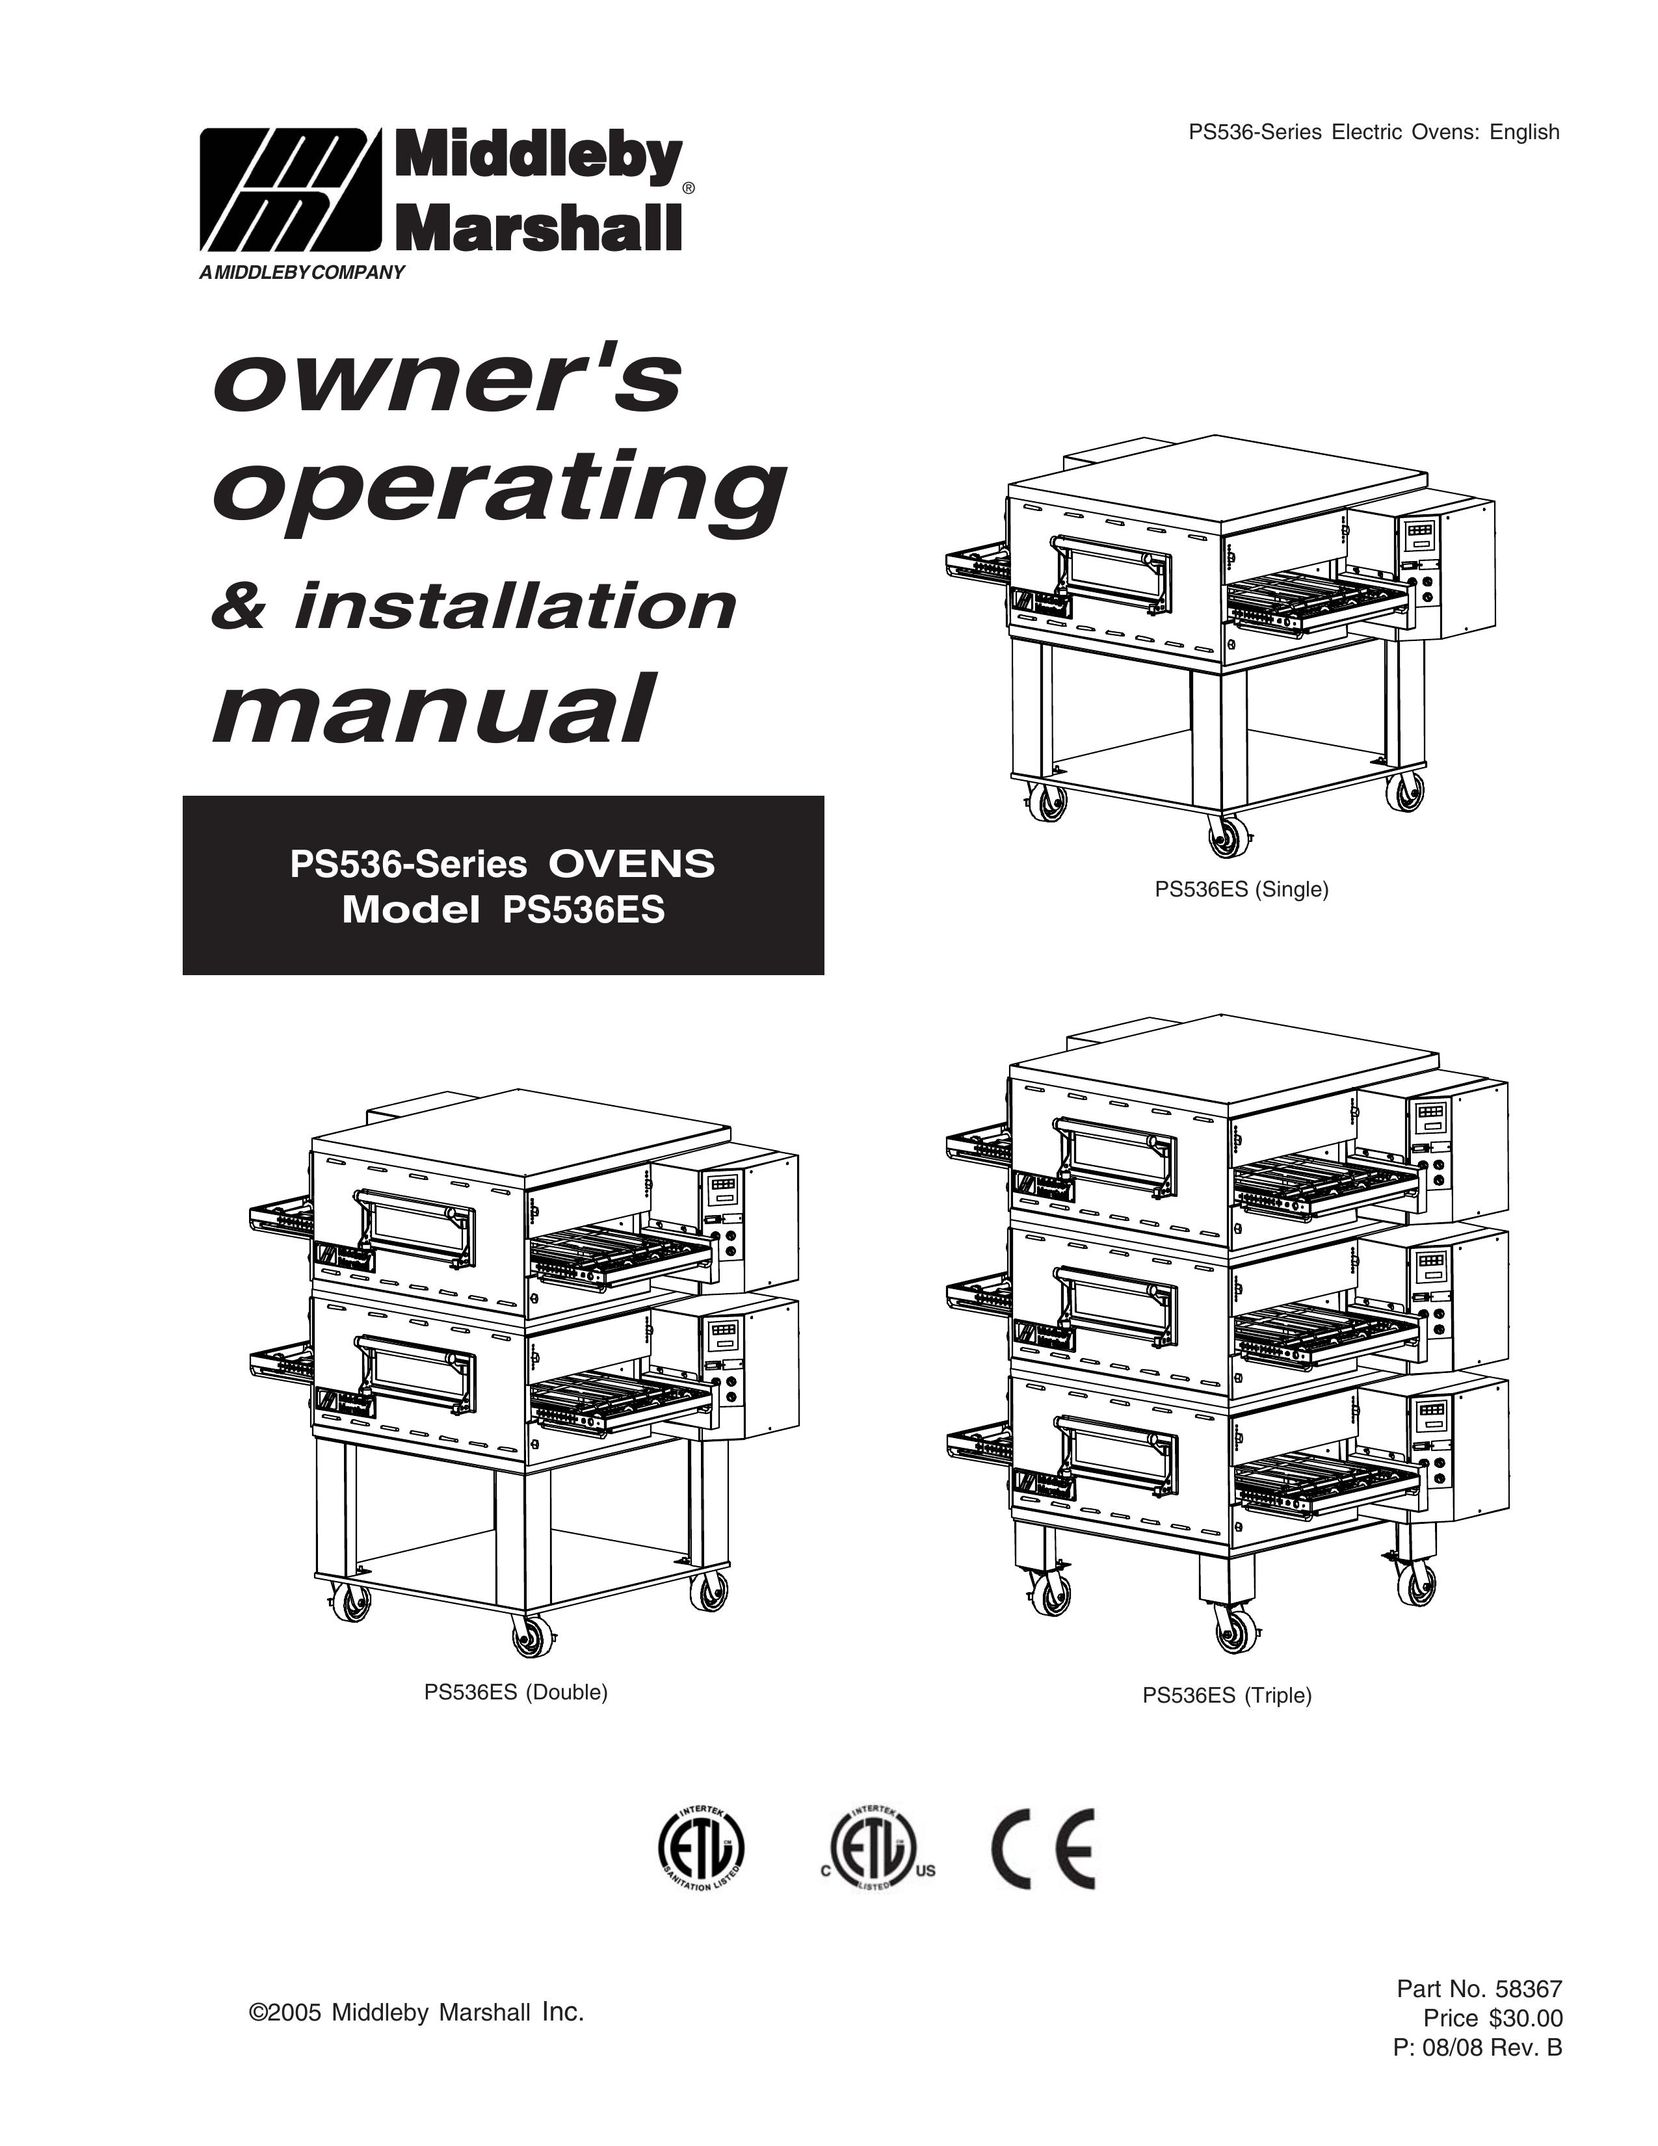 Middleby Marshall PS536-Series Oven User Manual